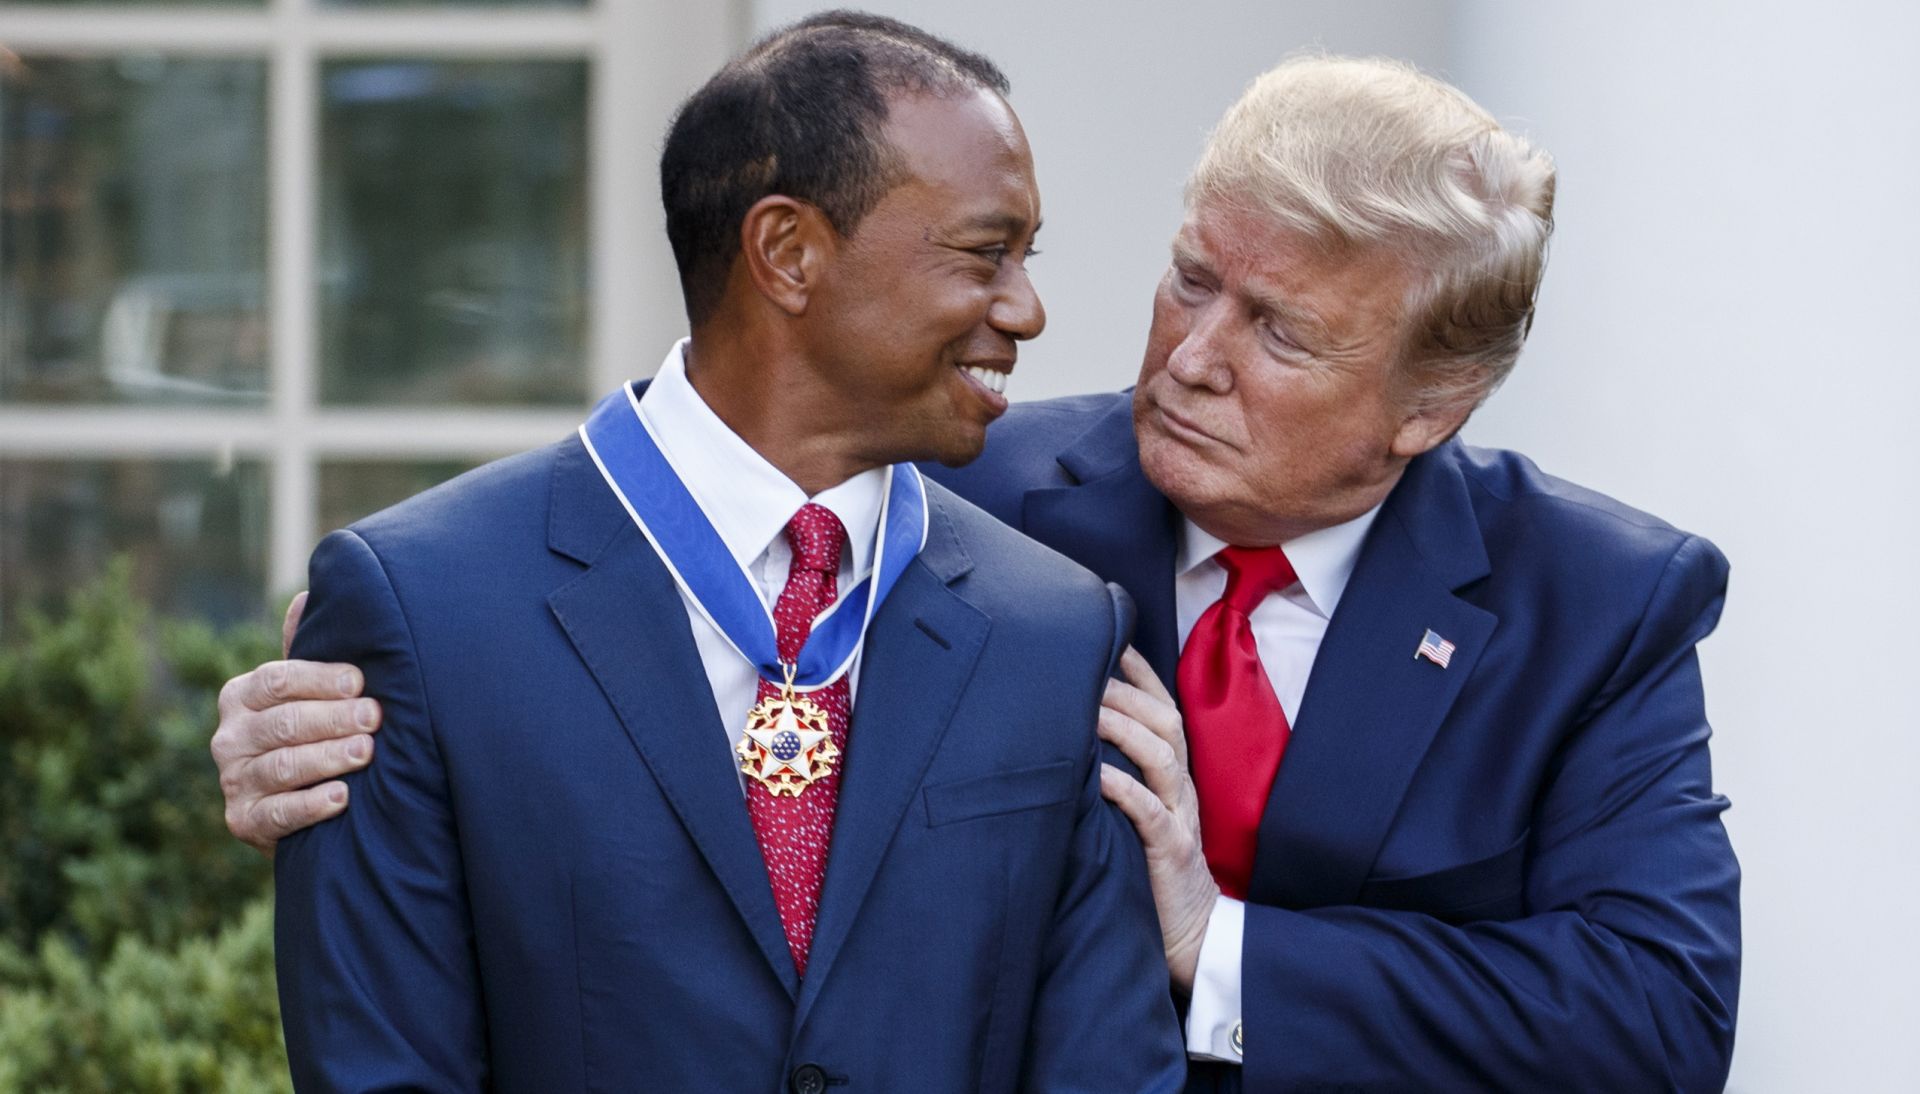 epaselect epa07552091 US President Donald J. Trump (R) awards golfer Tiger Woods (L) the Presidential Medal of Freedom during a ceremony in the Rose Garden of the White House in Washington, DC, USA, 06 May 2019. After winning the Masters President Trump tweeted that he would award Woods the Presidential Medal of Freedom.  EPA/SHAWN THEW